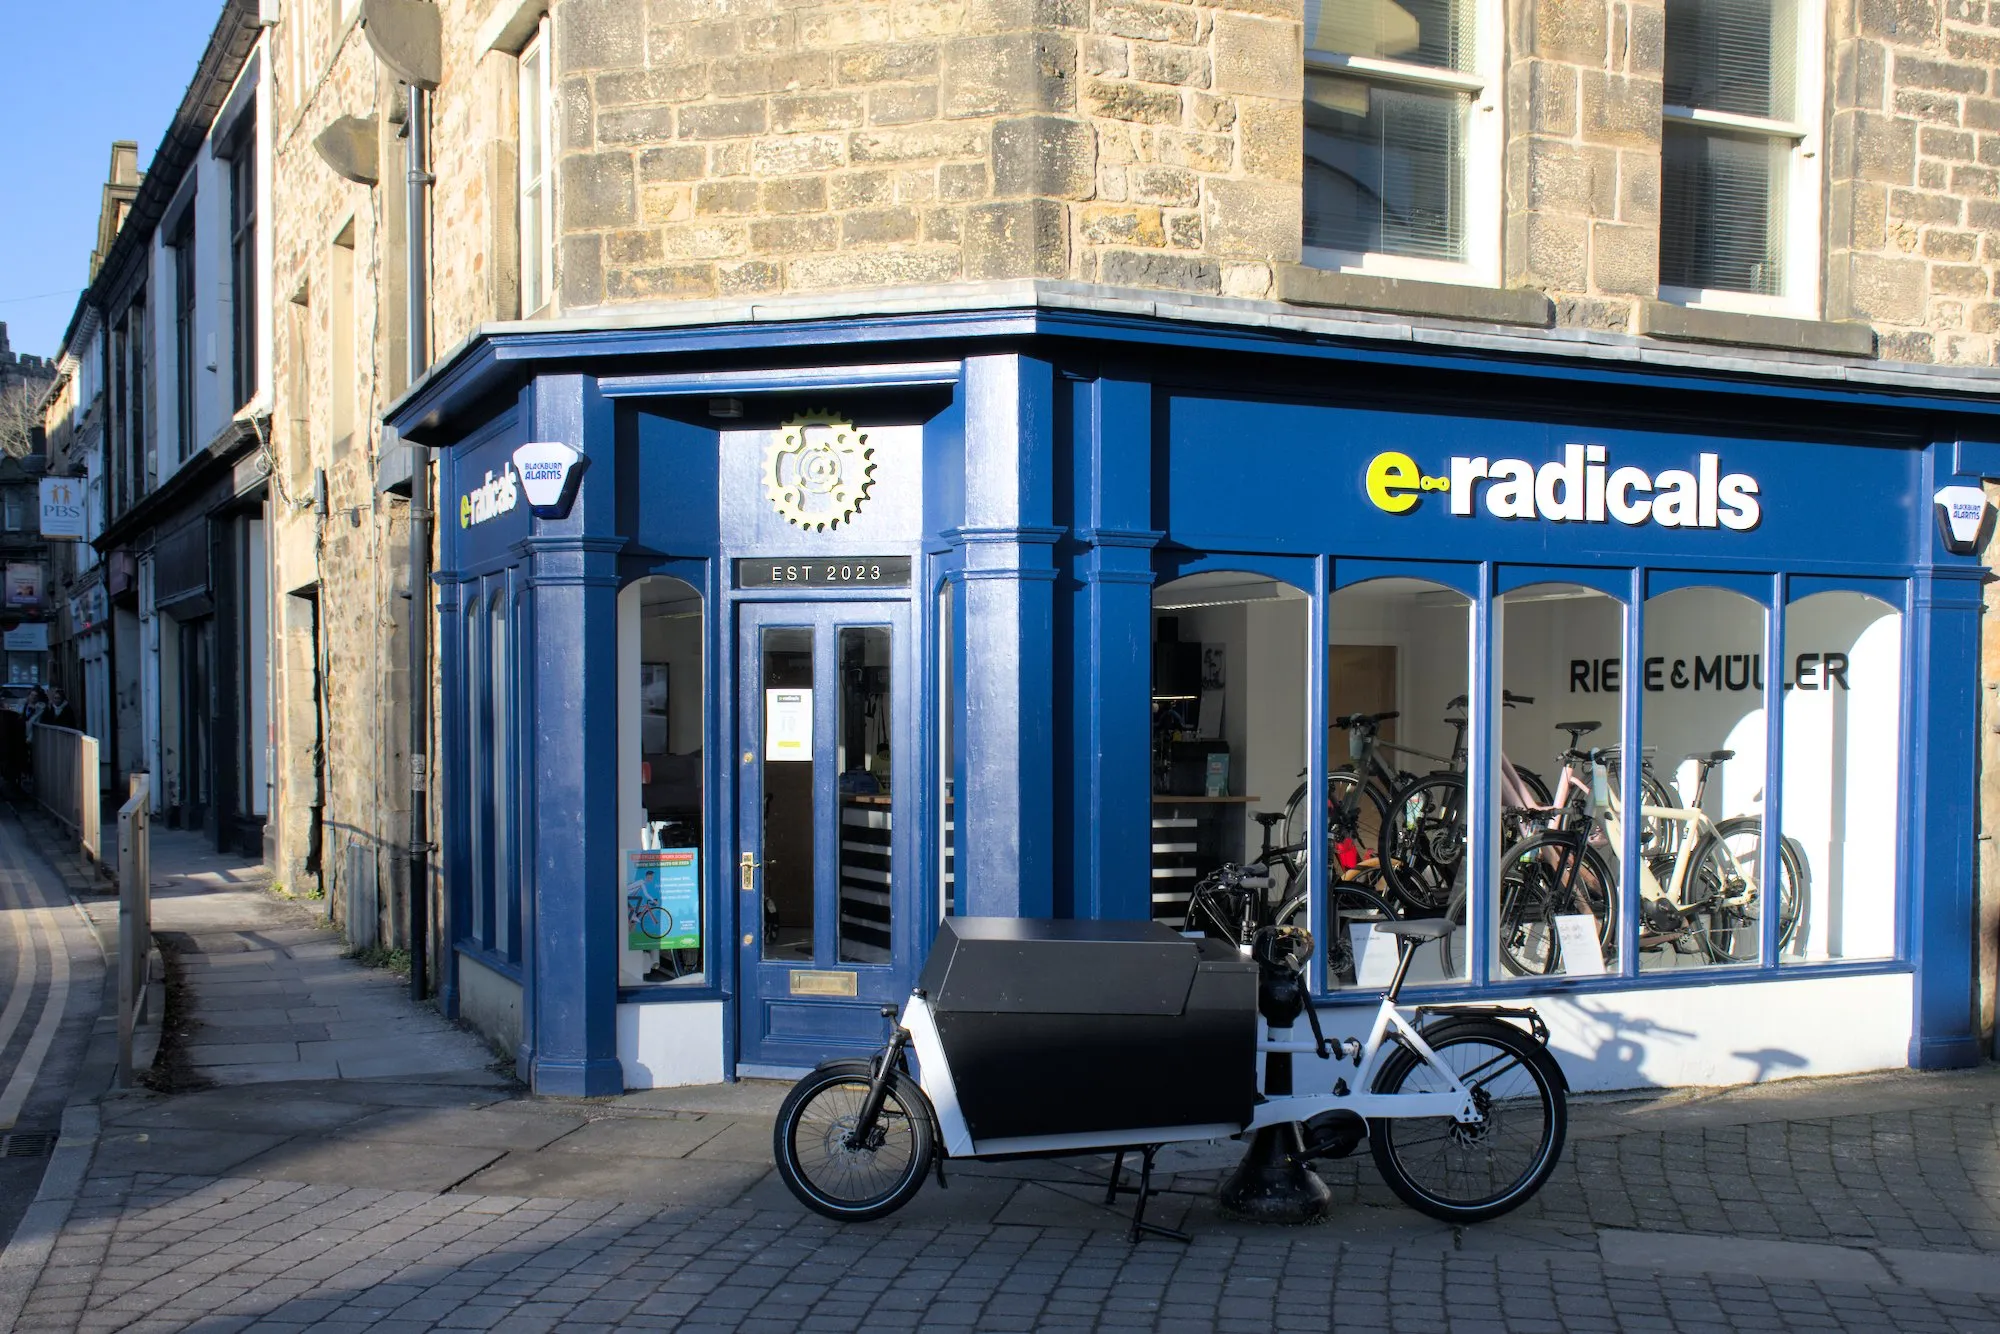 The E-Radicals shop on King Street